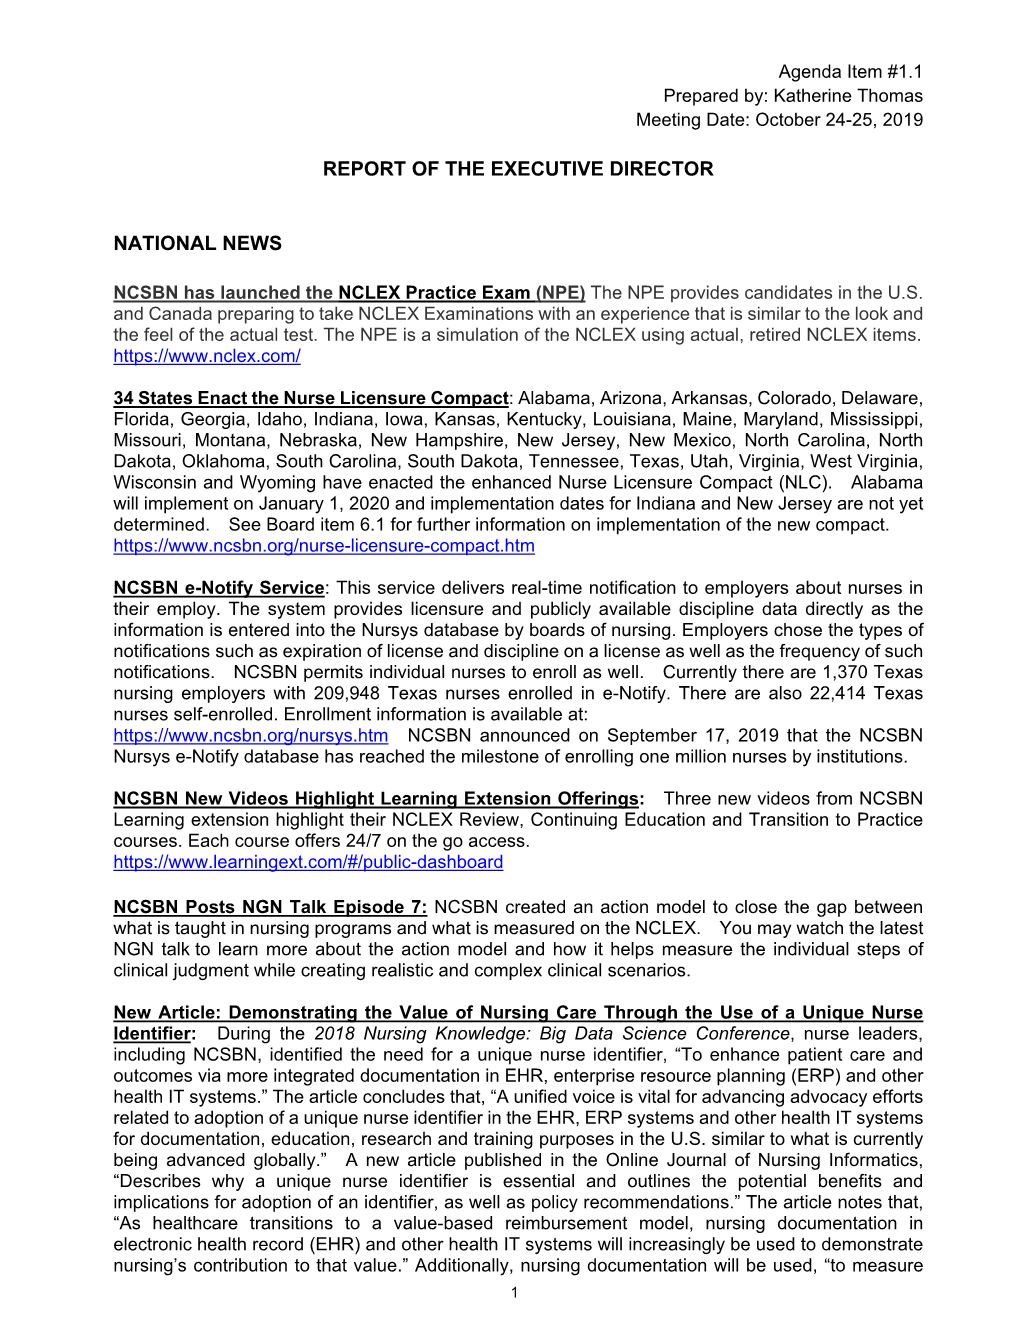 Report of the Executive Director National News